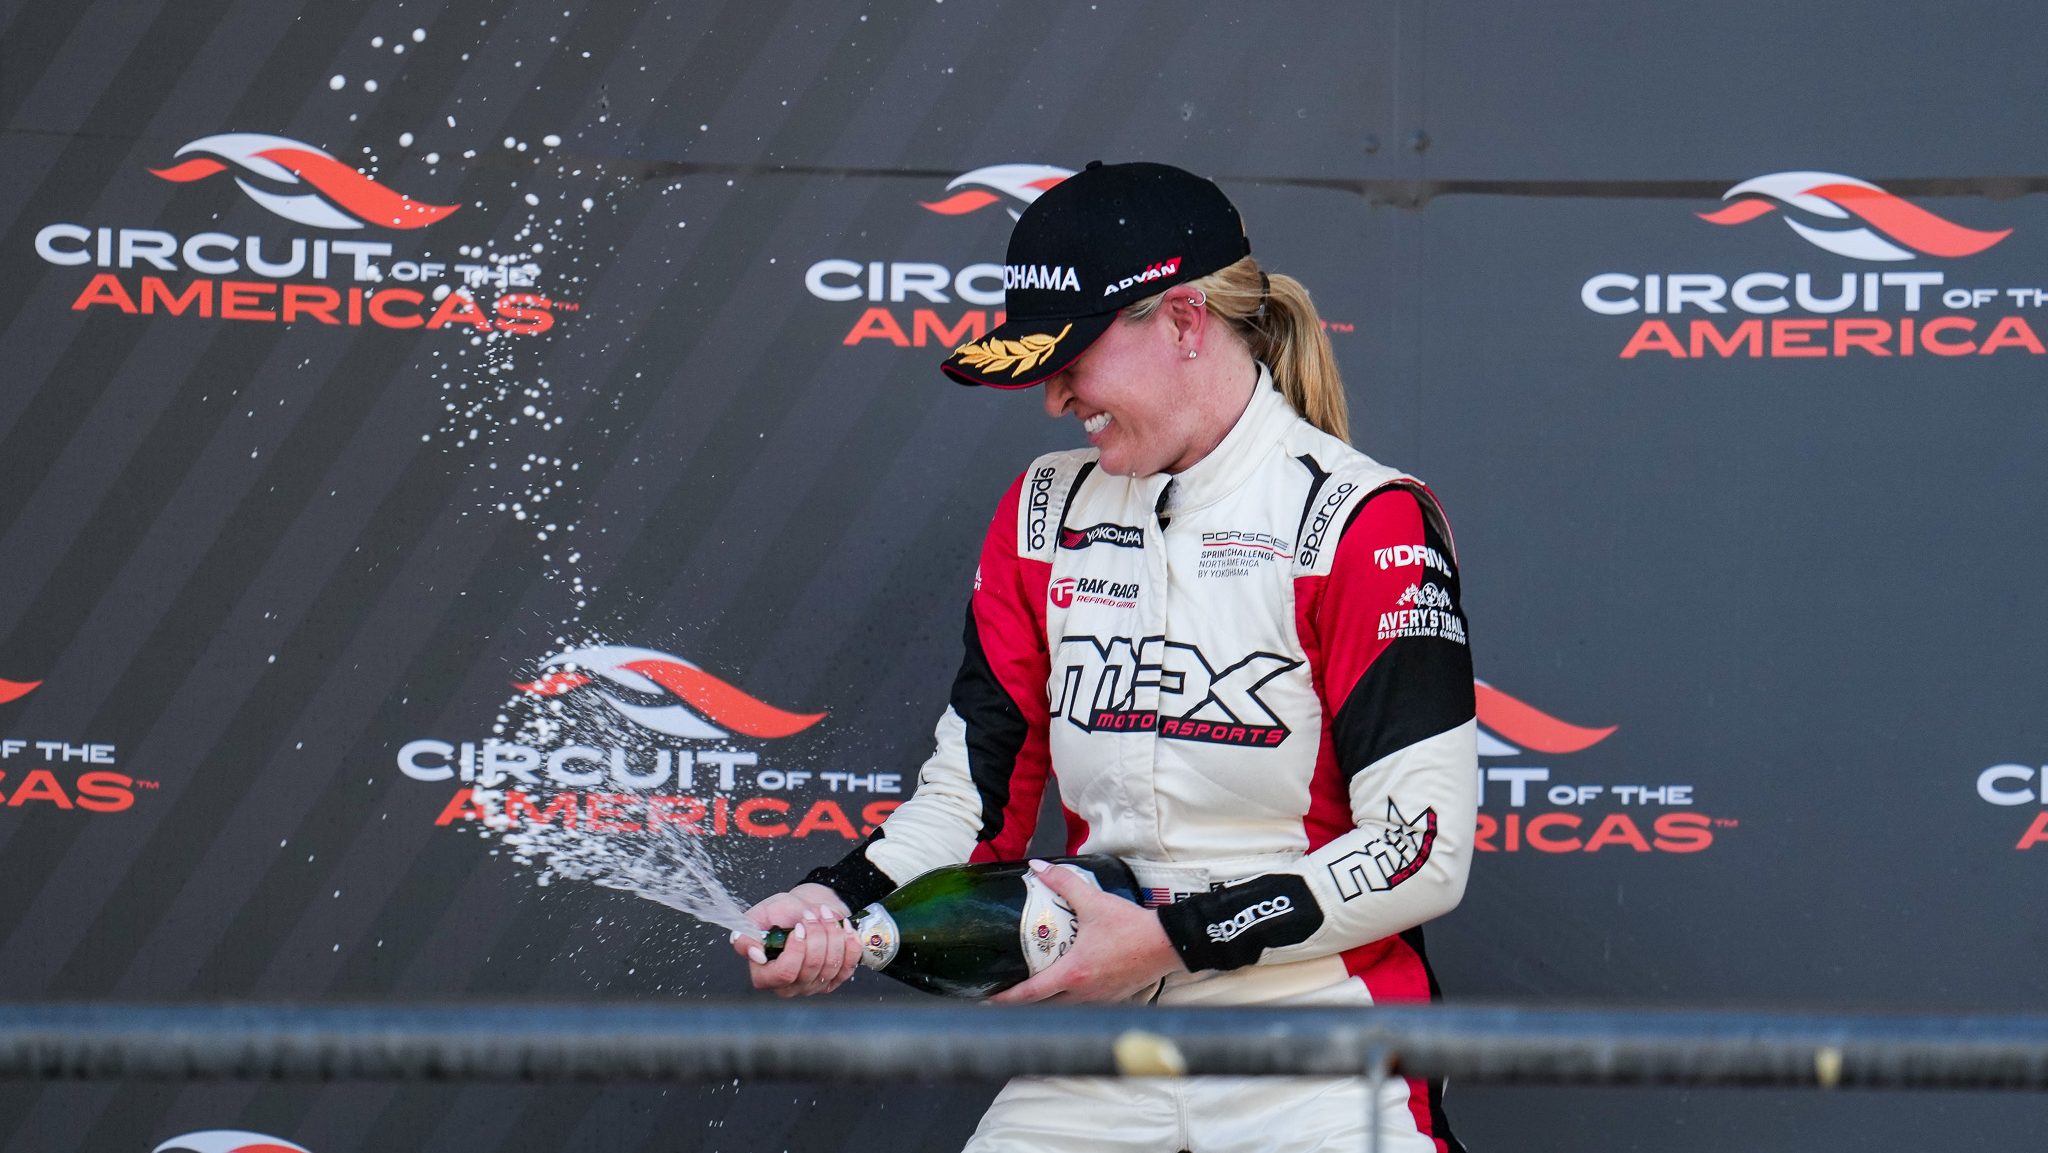 Freiberg Sweeps Weekend with Two Victories at Circuit of the Americas